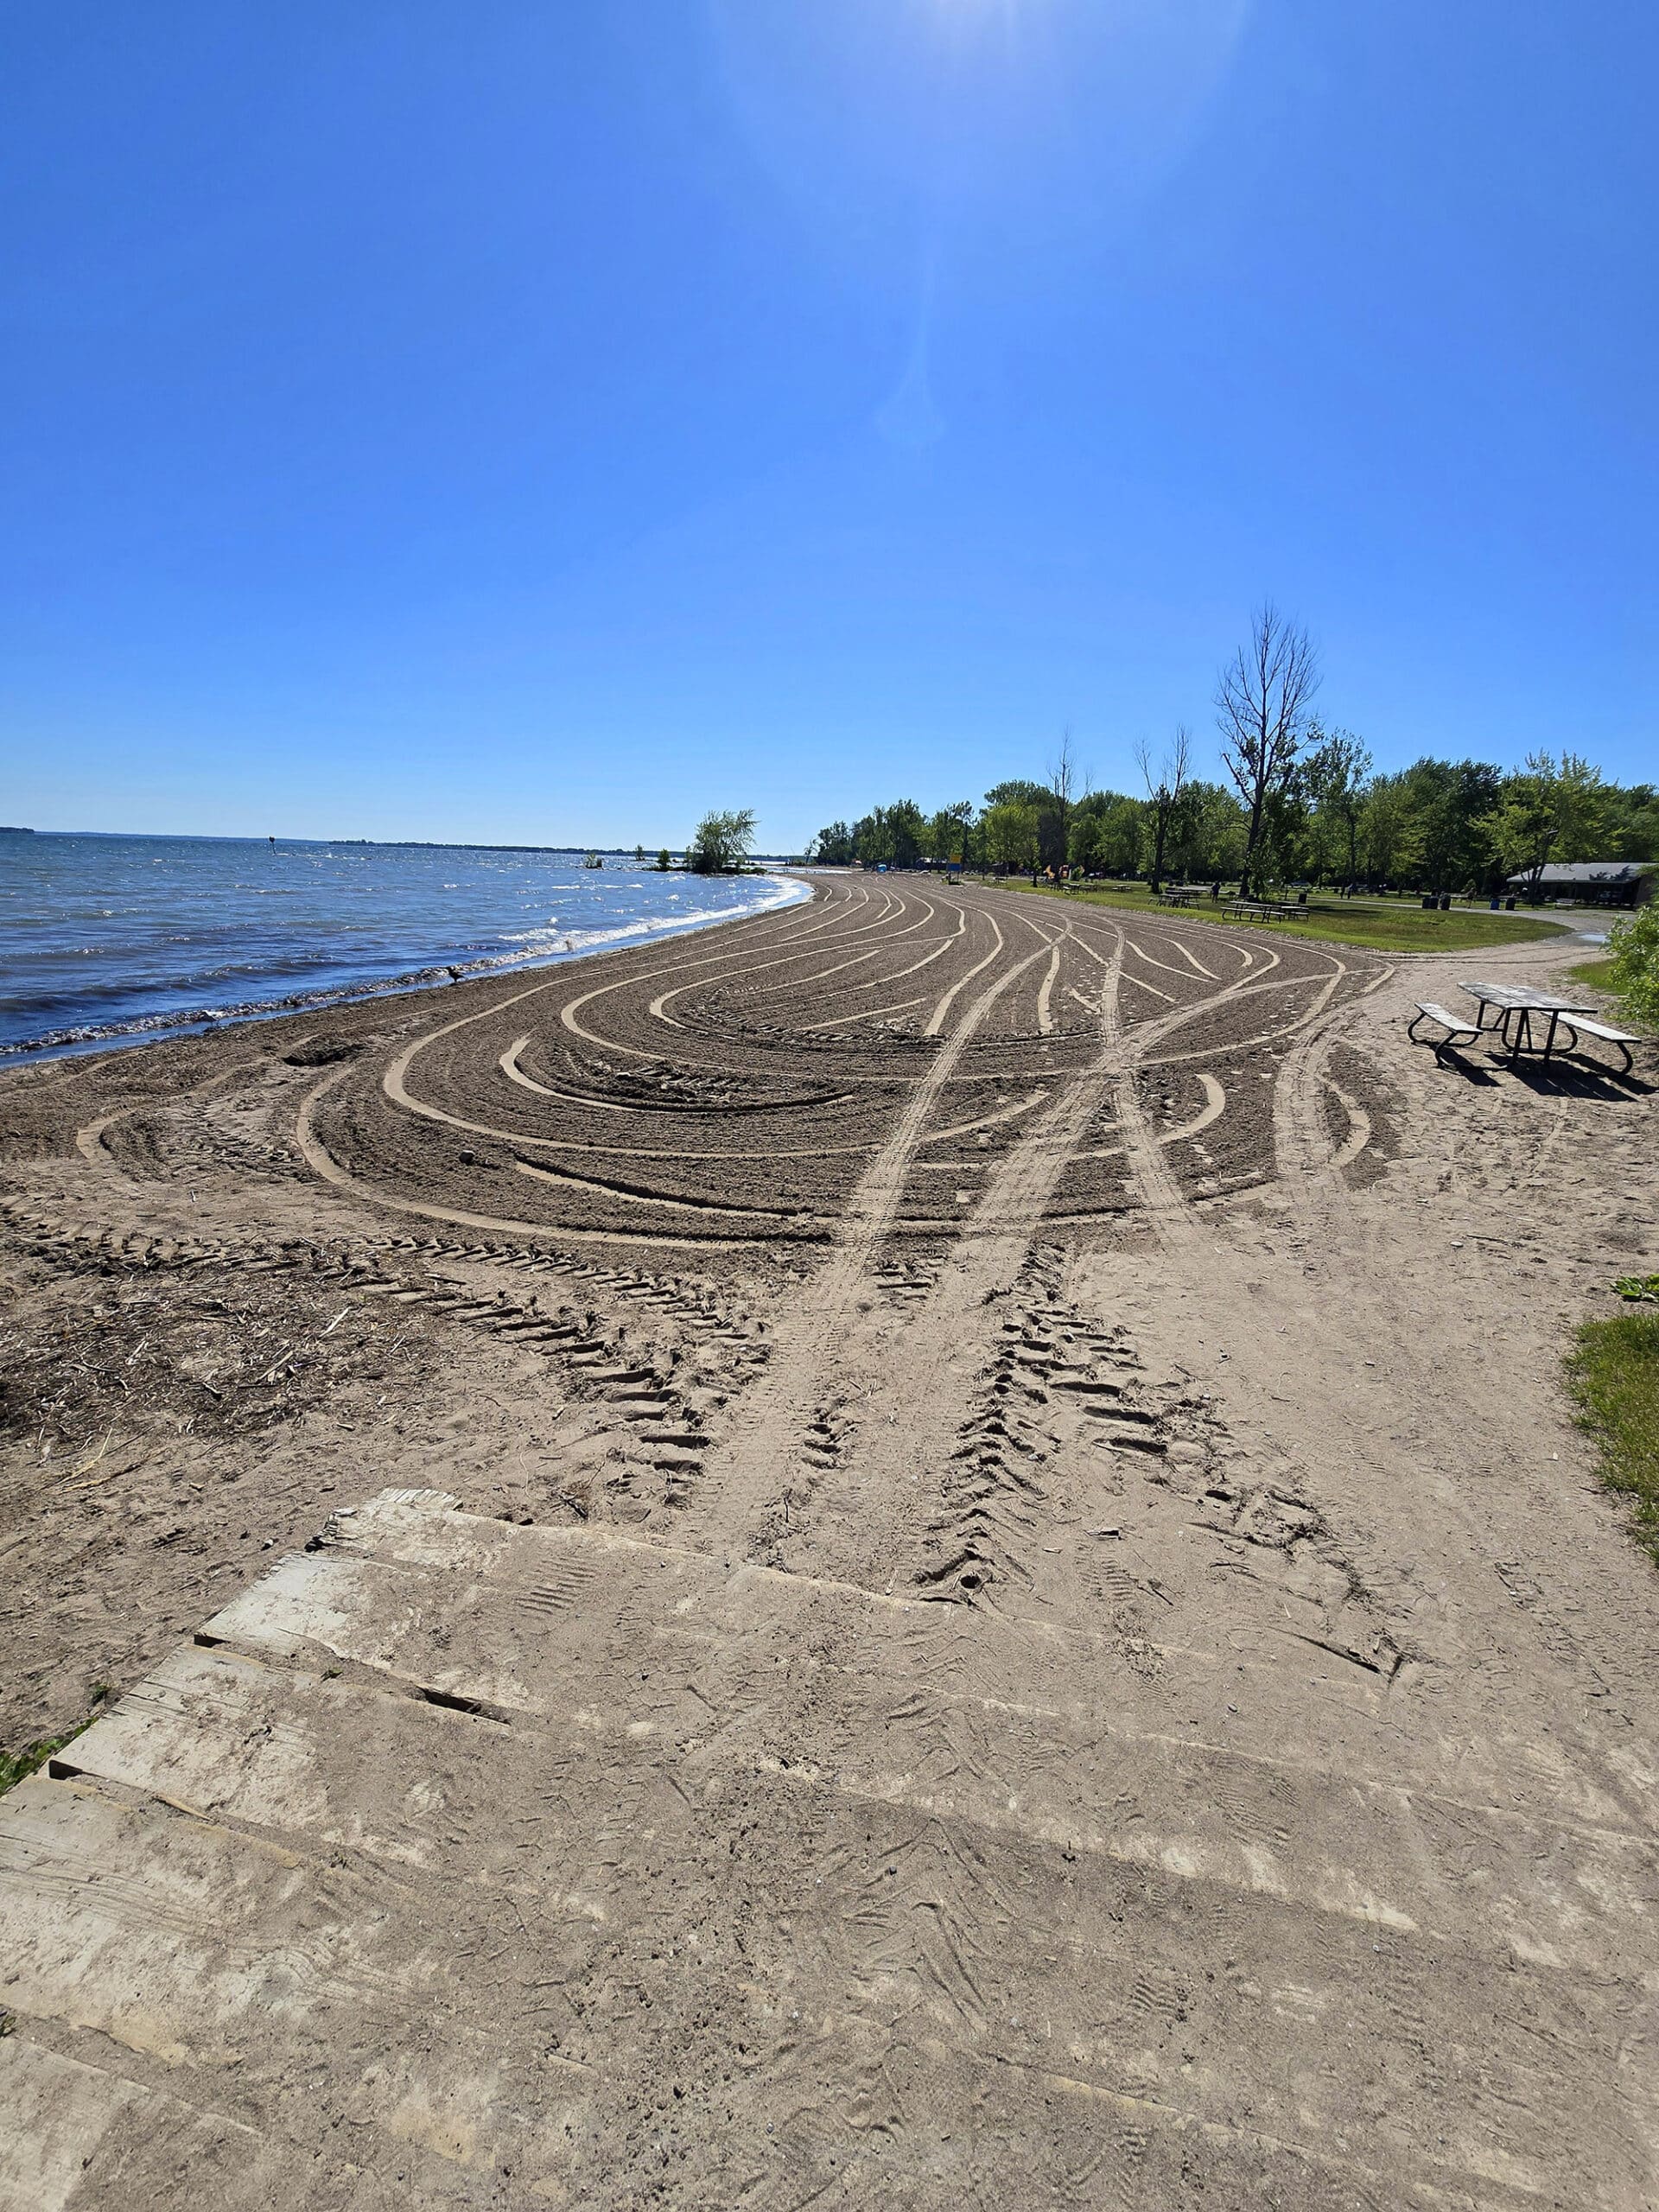 Sibbald point provincial park beach, a large well groomed beach on lake simcoe.